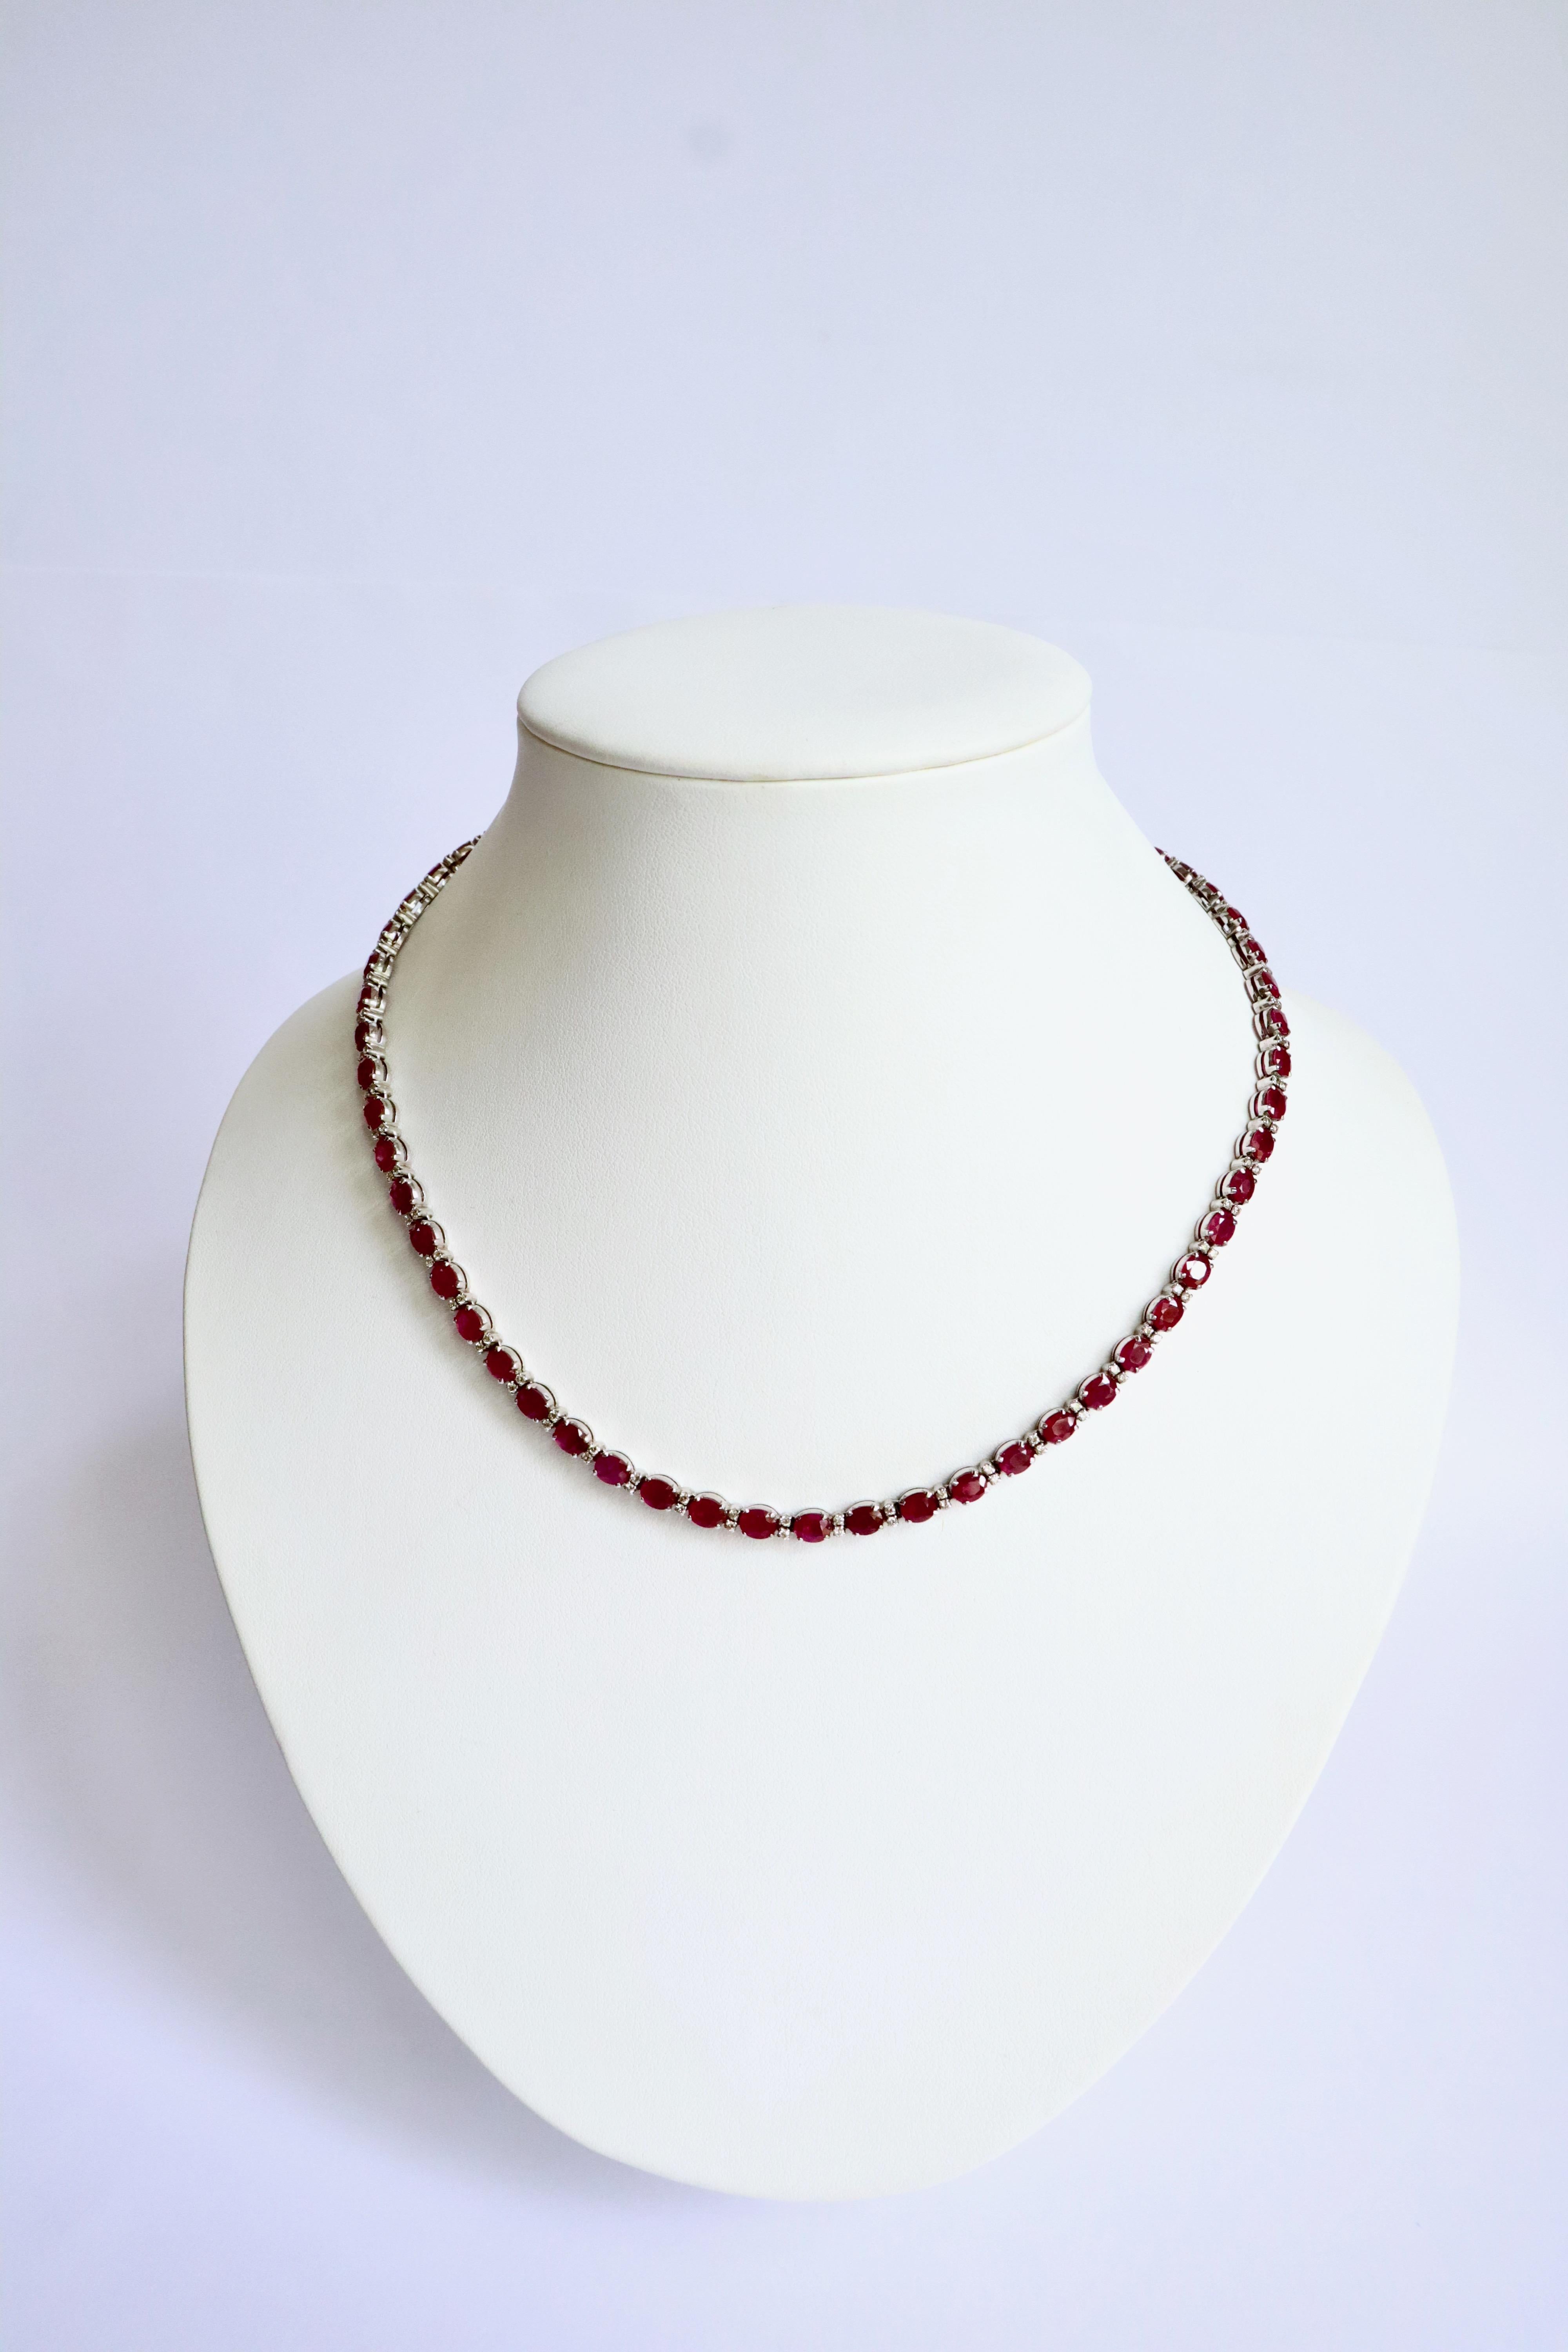 Ruby and diamond line necklace Choker in 18 carat white gold setting.
It is composed of 60 rubies of oval cut alternated with 2 diamonds each diamond weighing approximately 0.01 carat.
Total weight of the 60 rubies: 25.9 carats.
Total weight of the